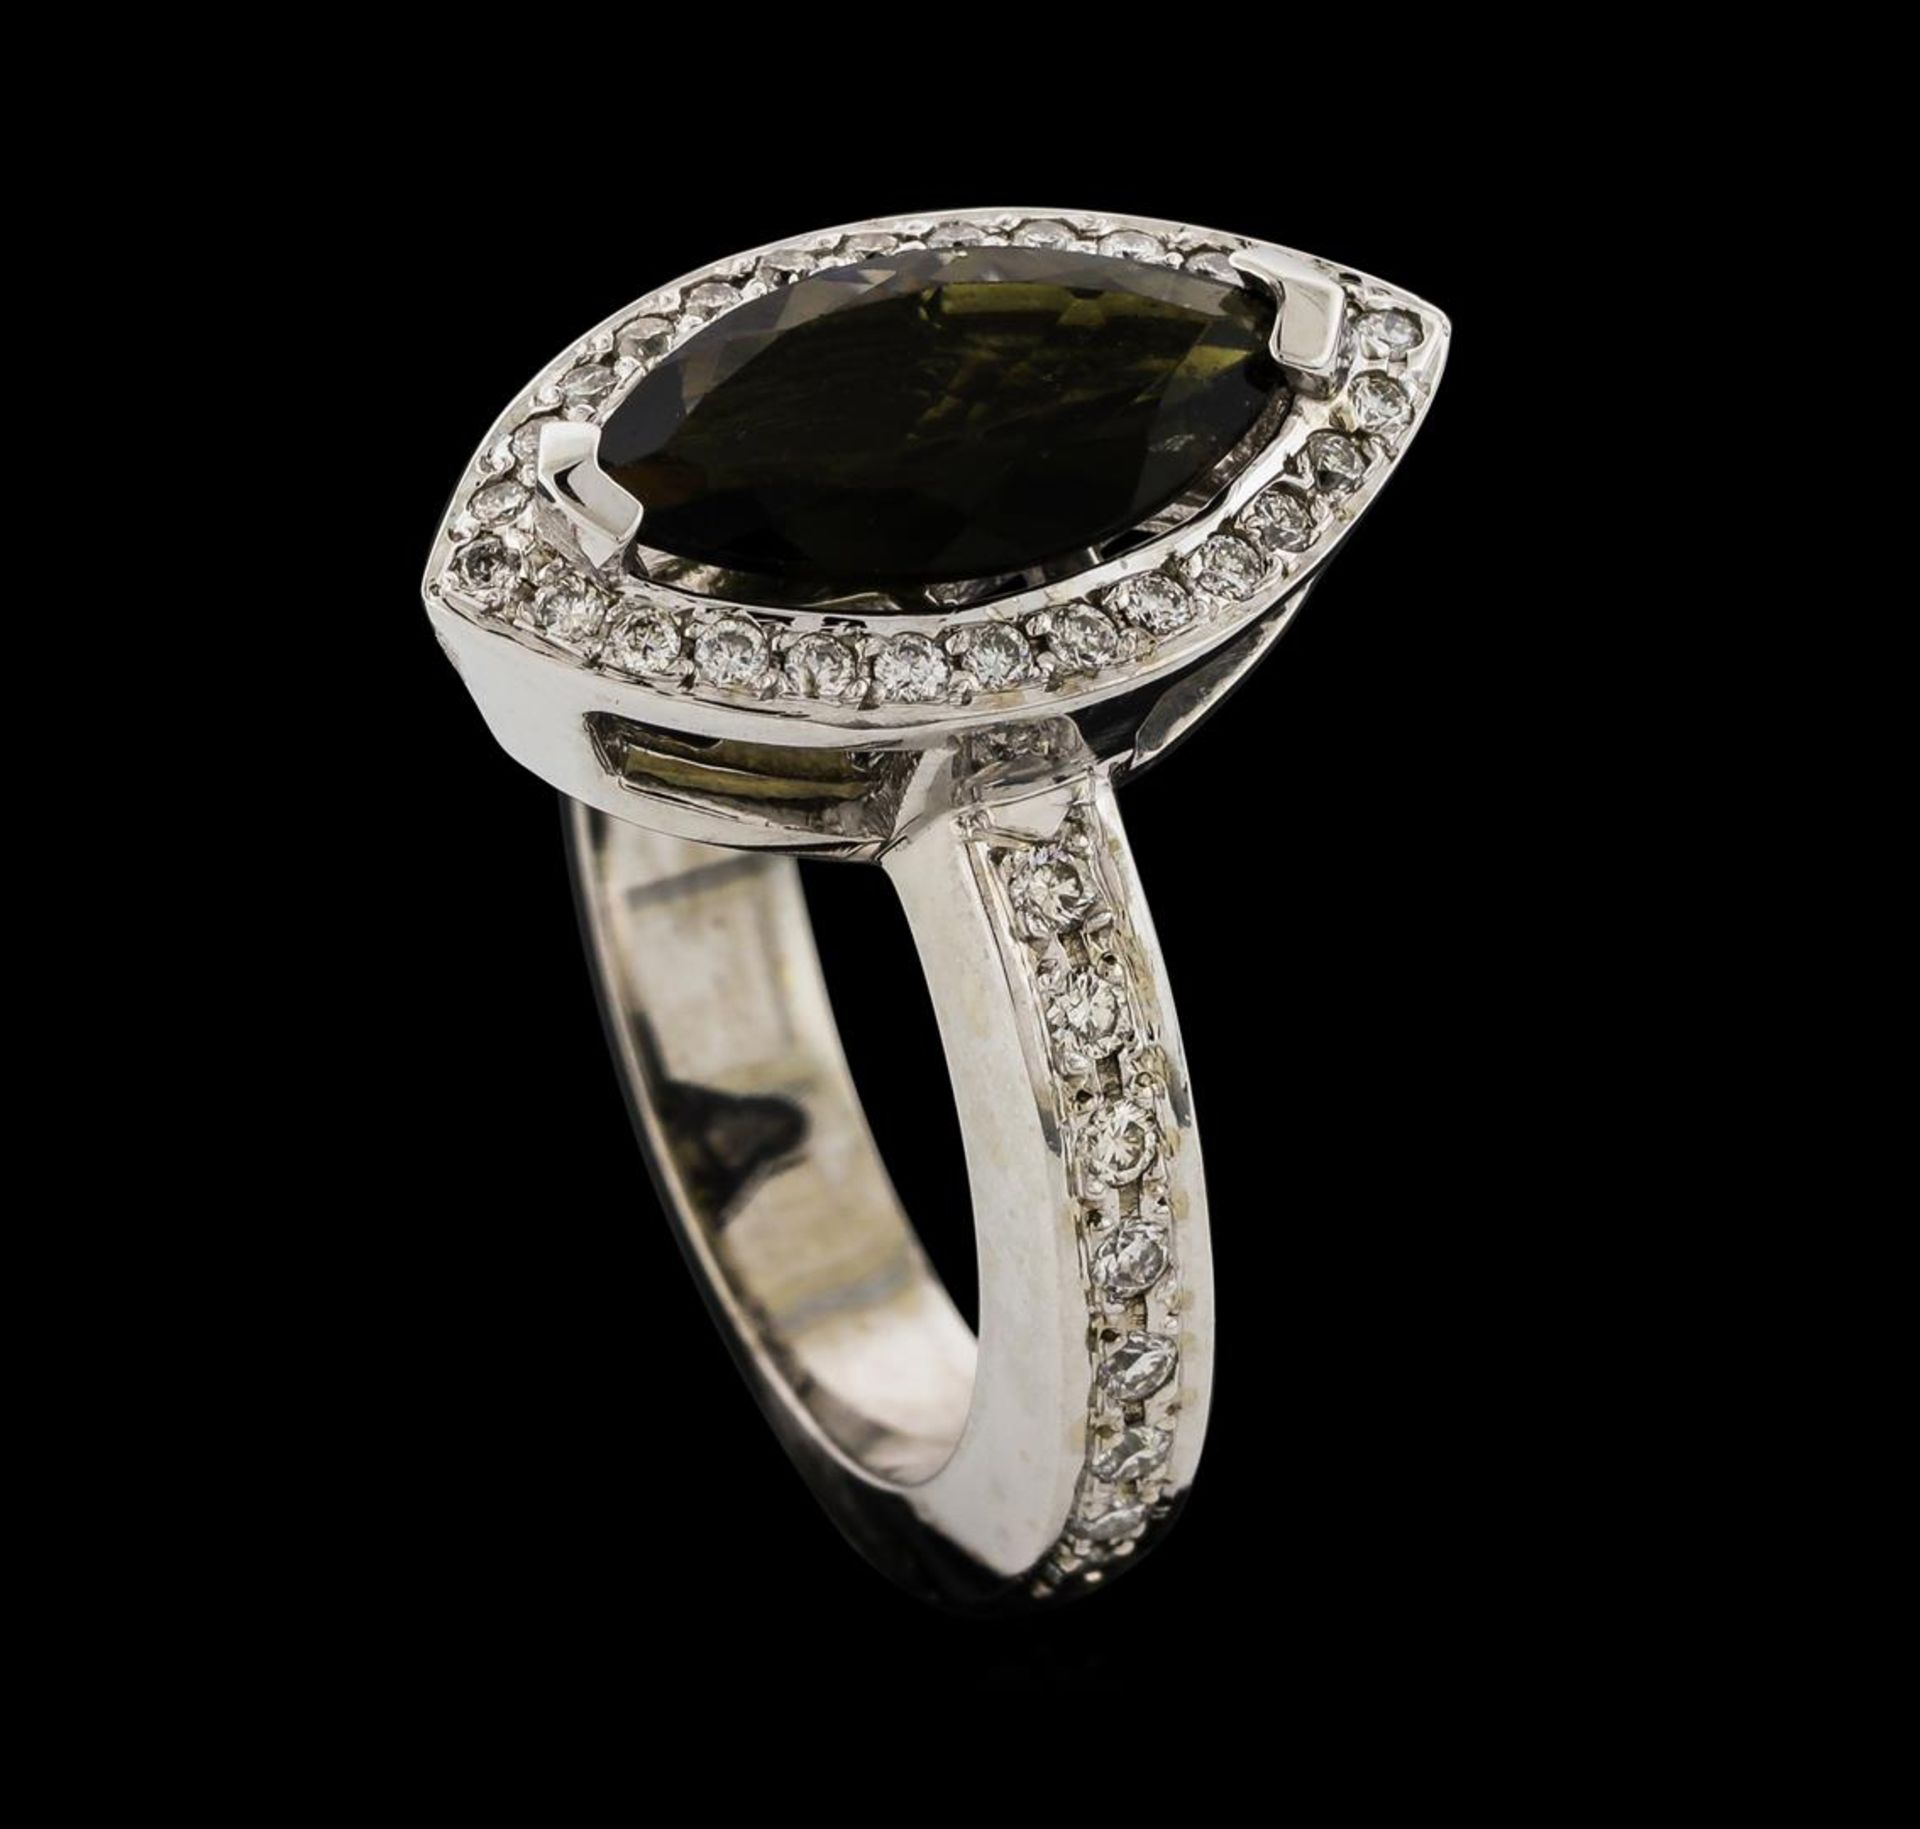 1.61 ctw Tourmaline and Diamond Ring - 14KT White Gold - Image 4 of 4